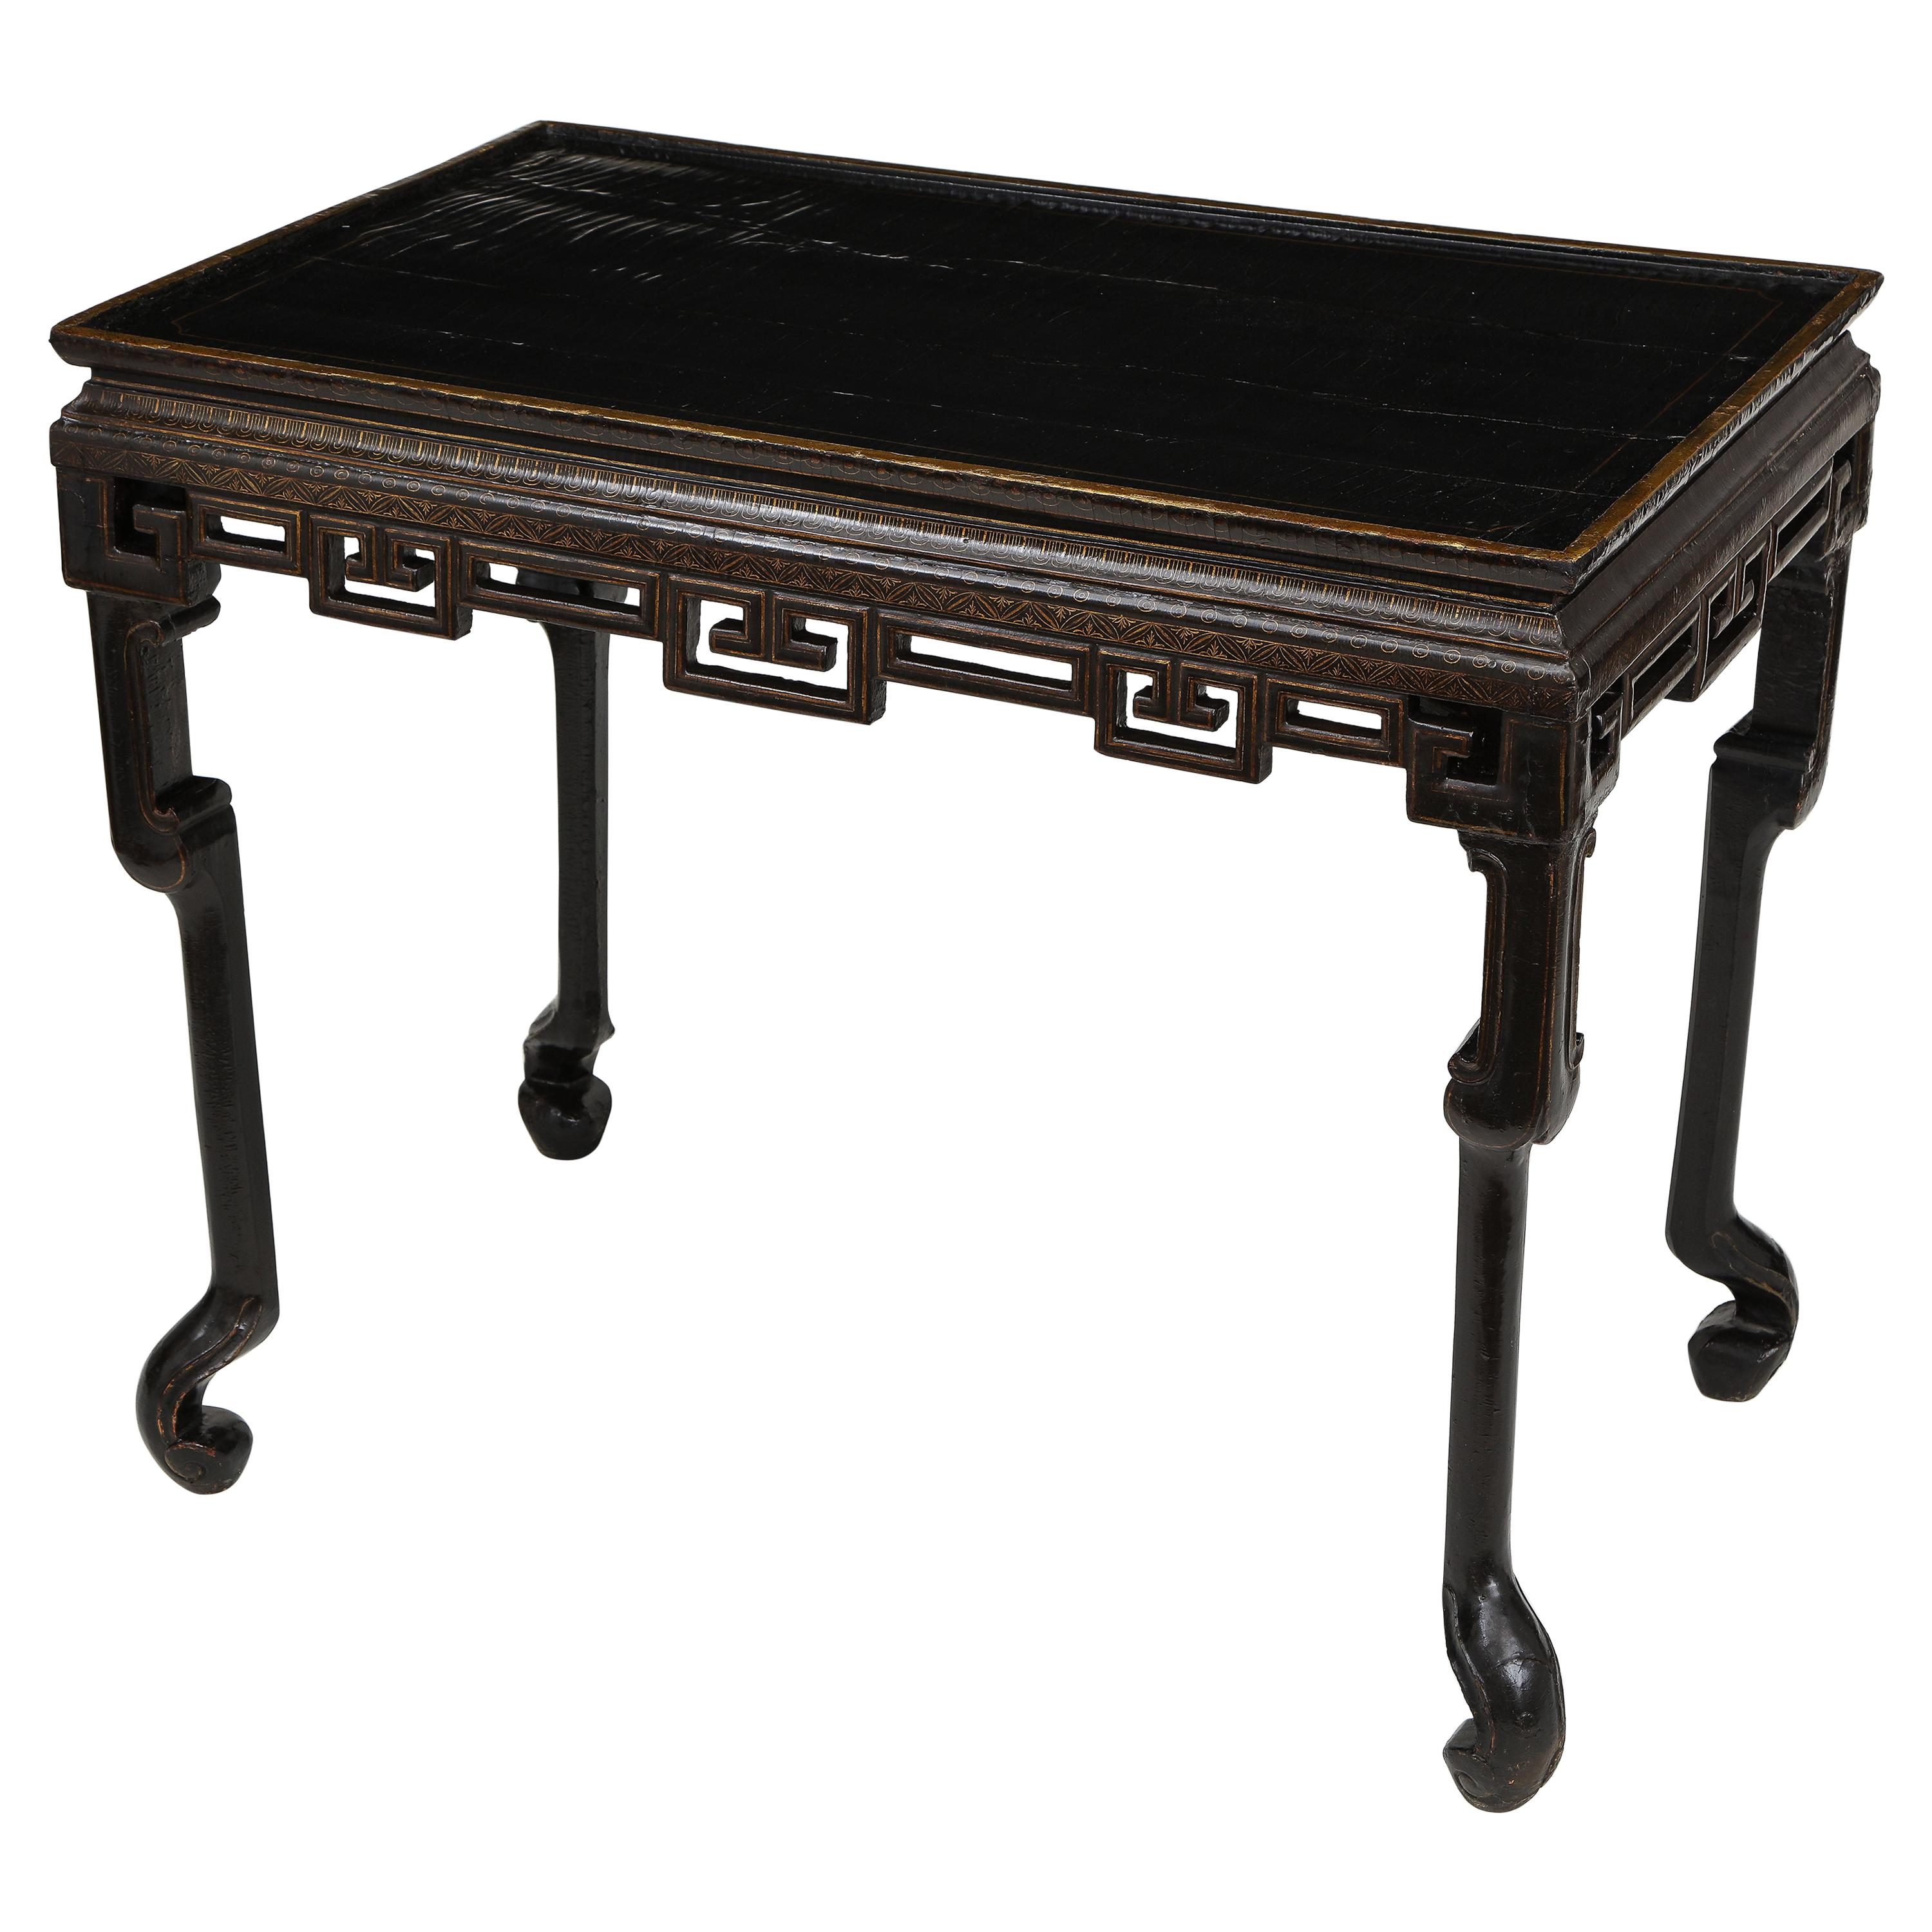 George II Black and Gilt Japanned Center Table